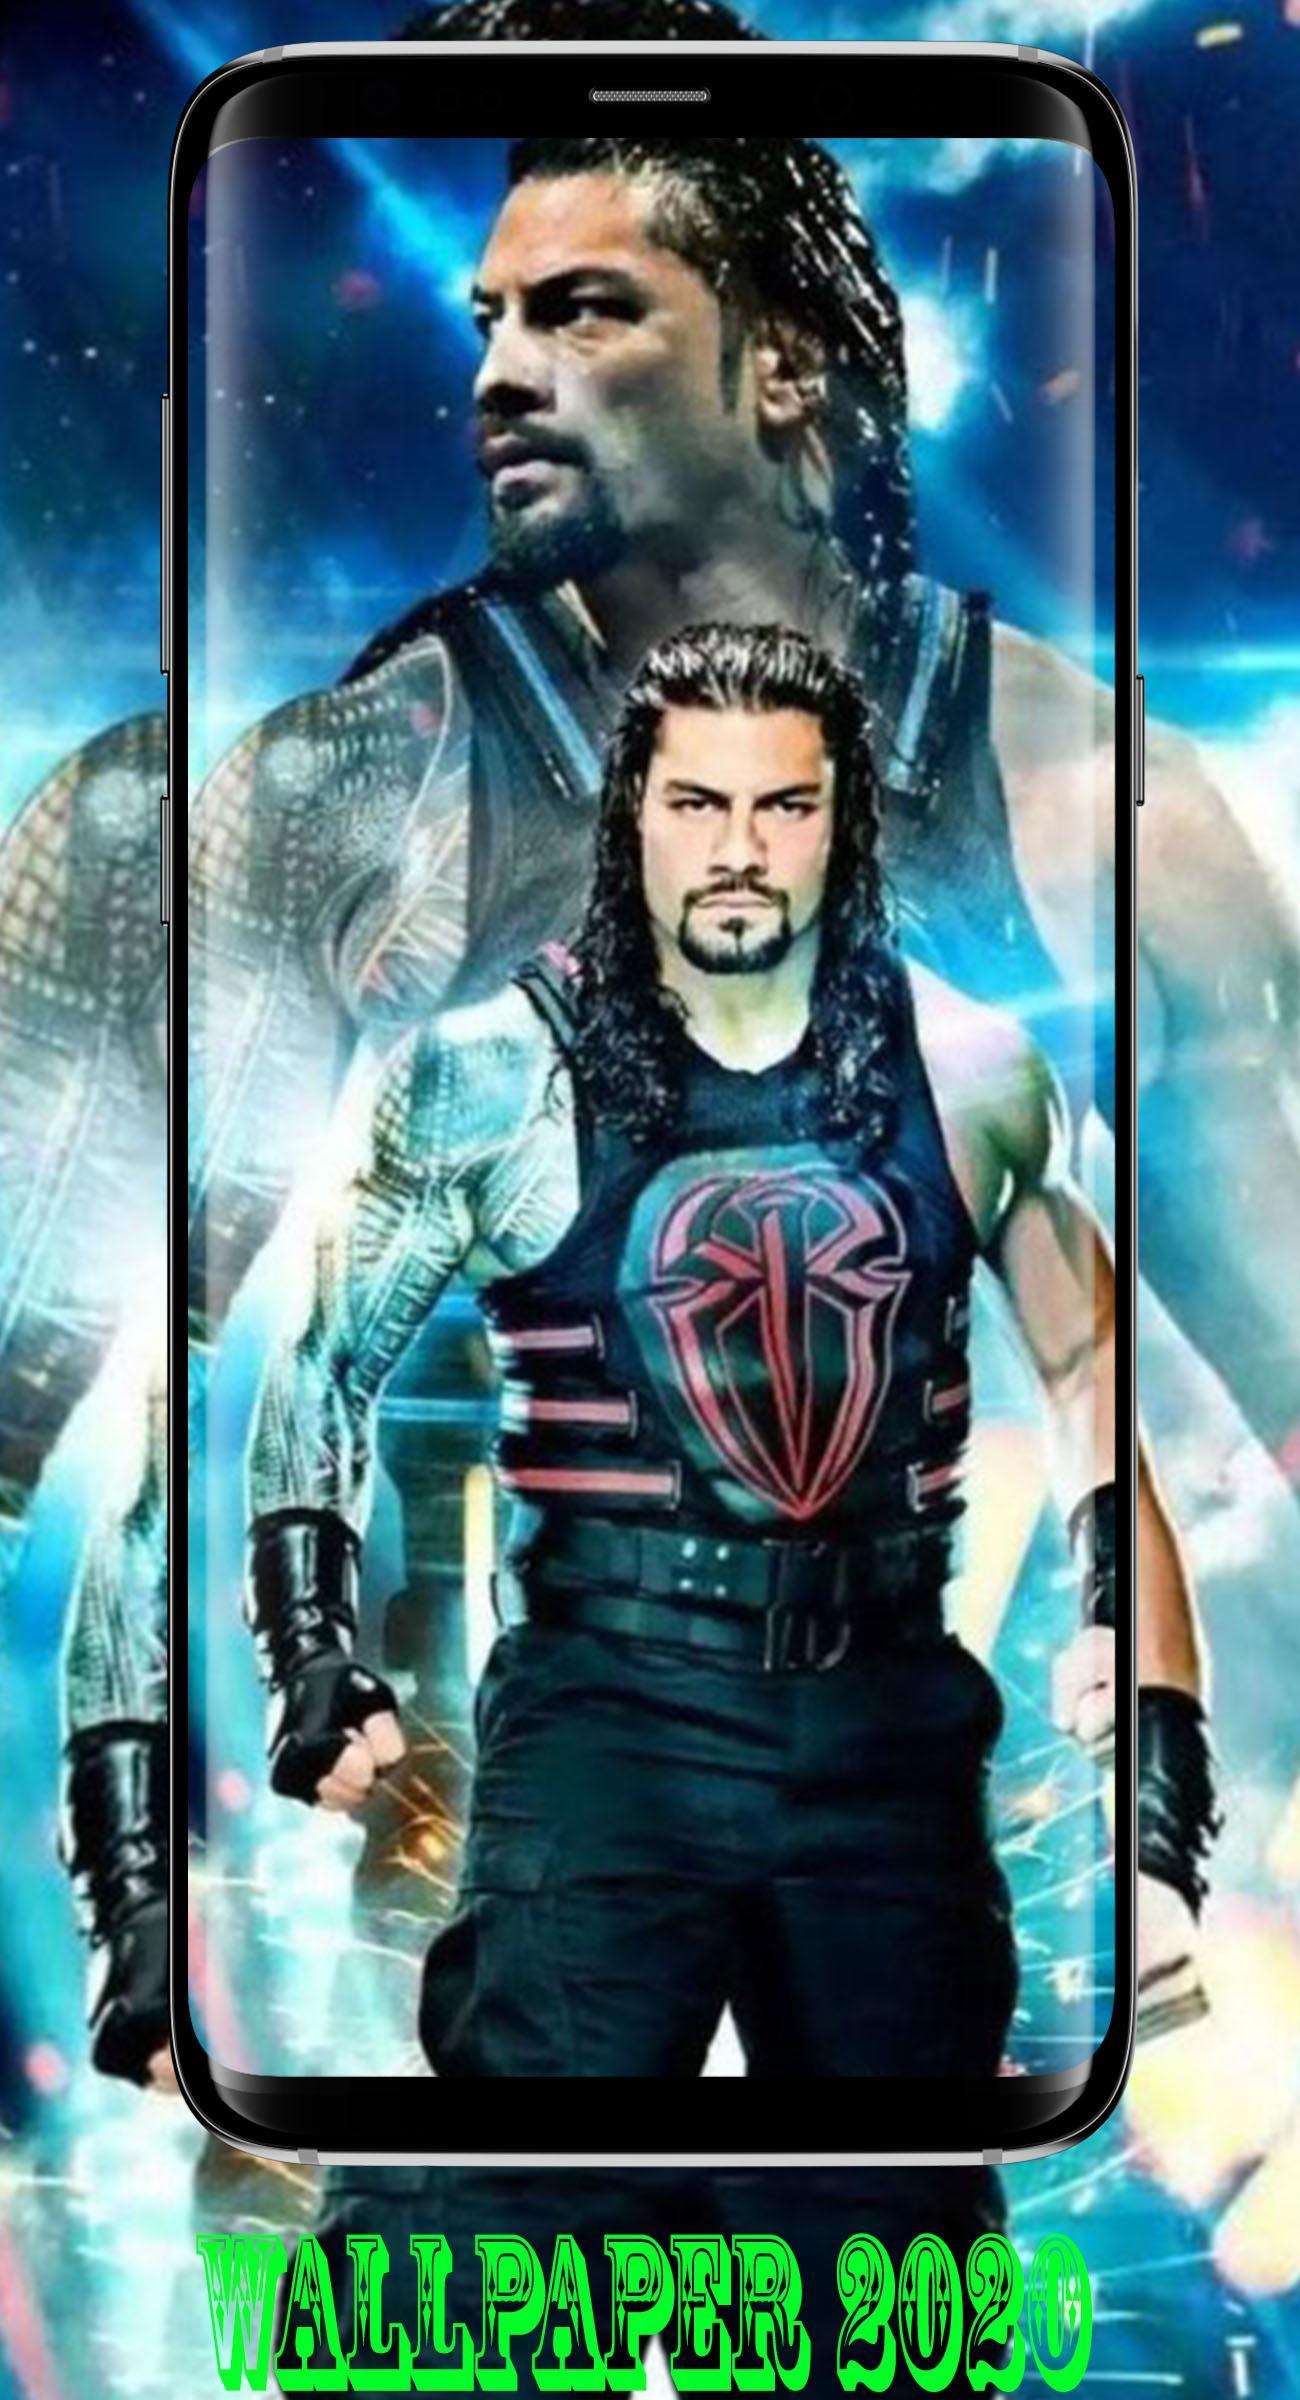 Roman Reigns Wwe Wallpaper Hd For Android Apk Download